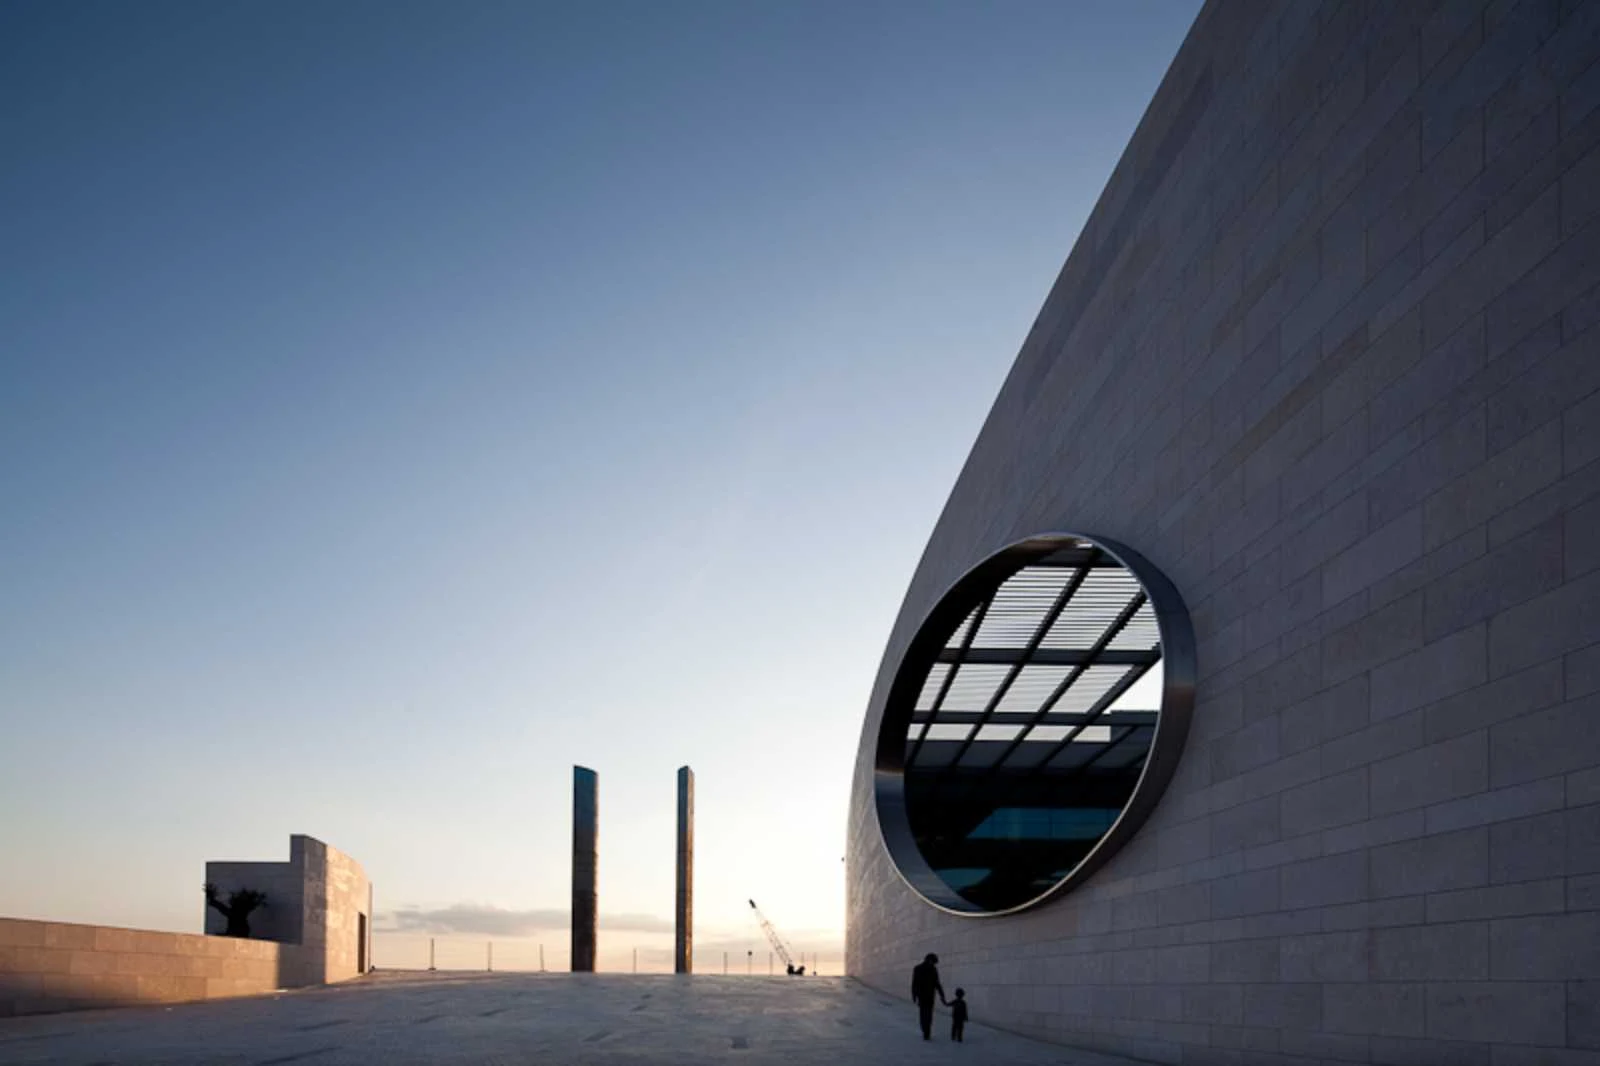 Portugal: CHAMPALIMAUD CENTRE by CHARLES CORREA